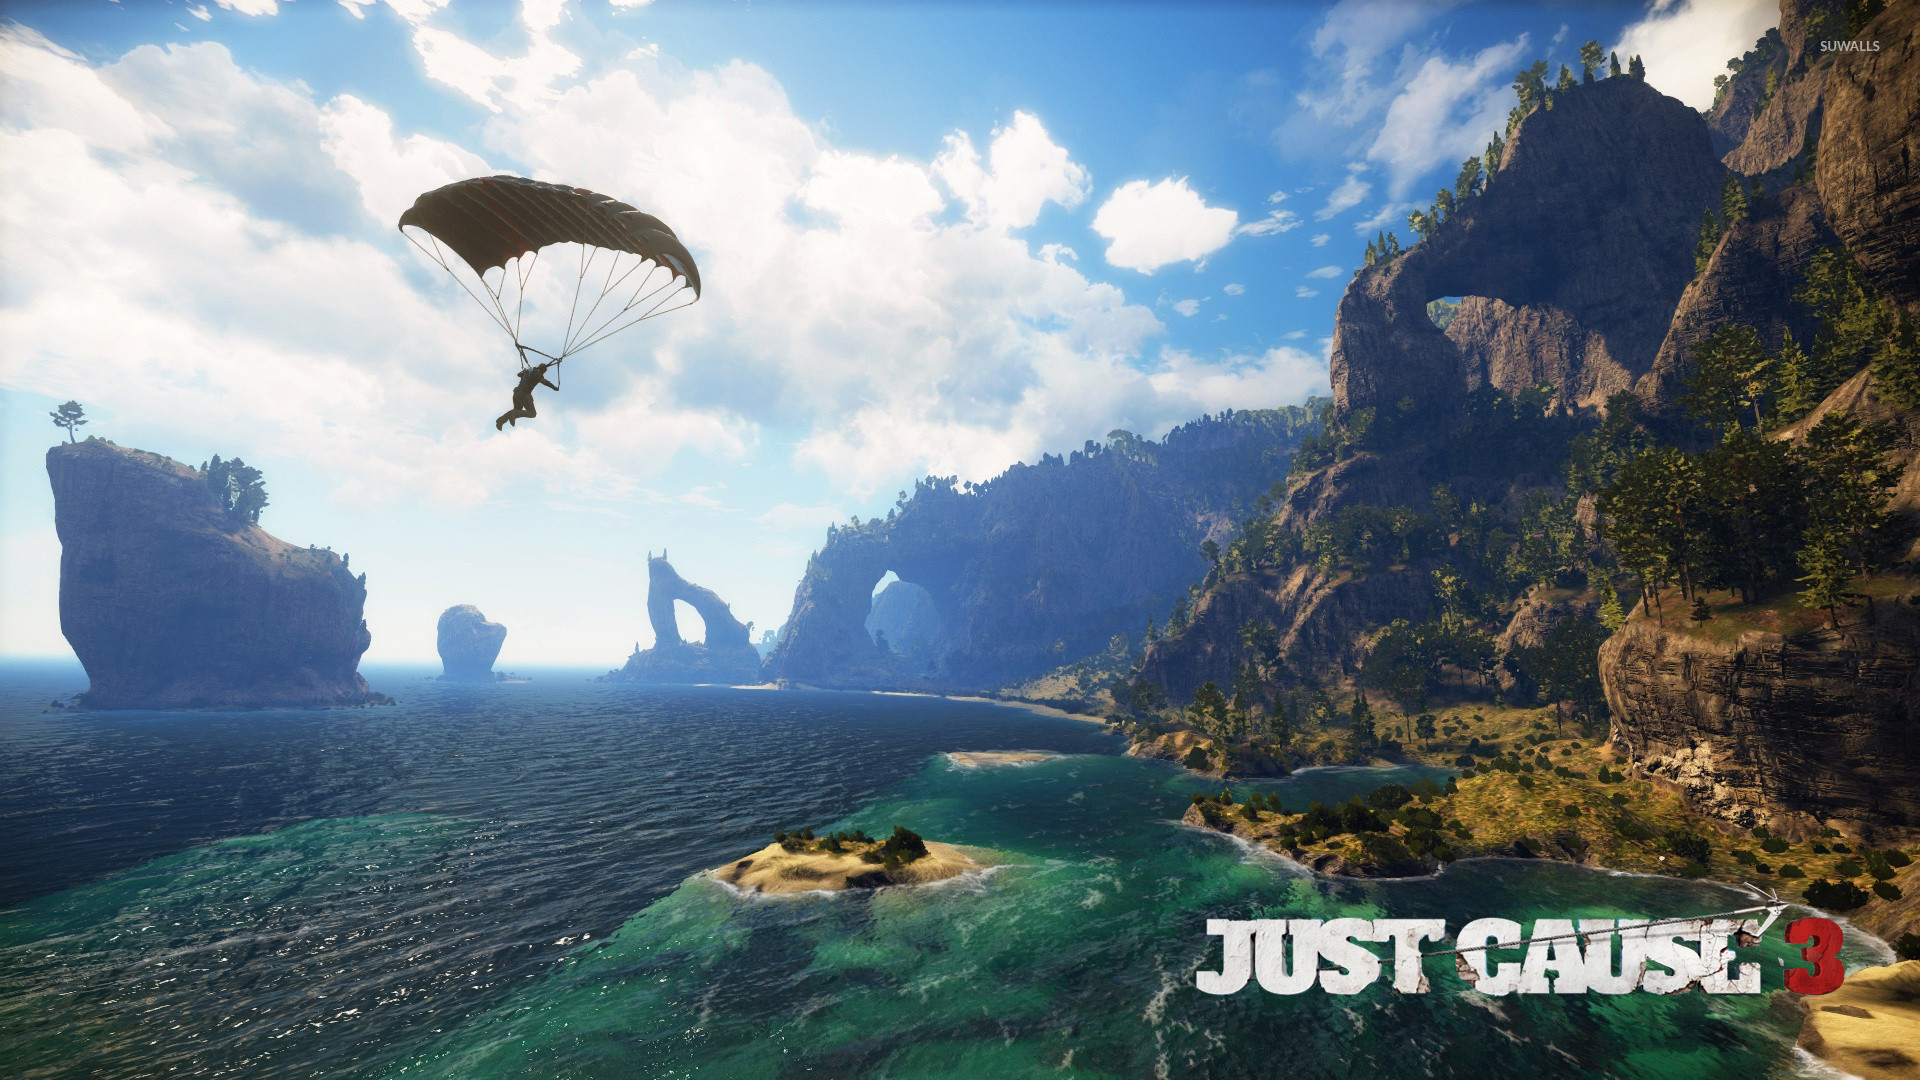 1920x1080 Parachuting over the sea - Just Cause 3 wallpaper  jpg